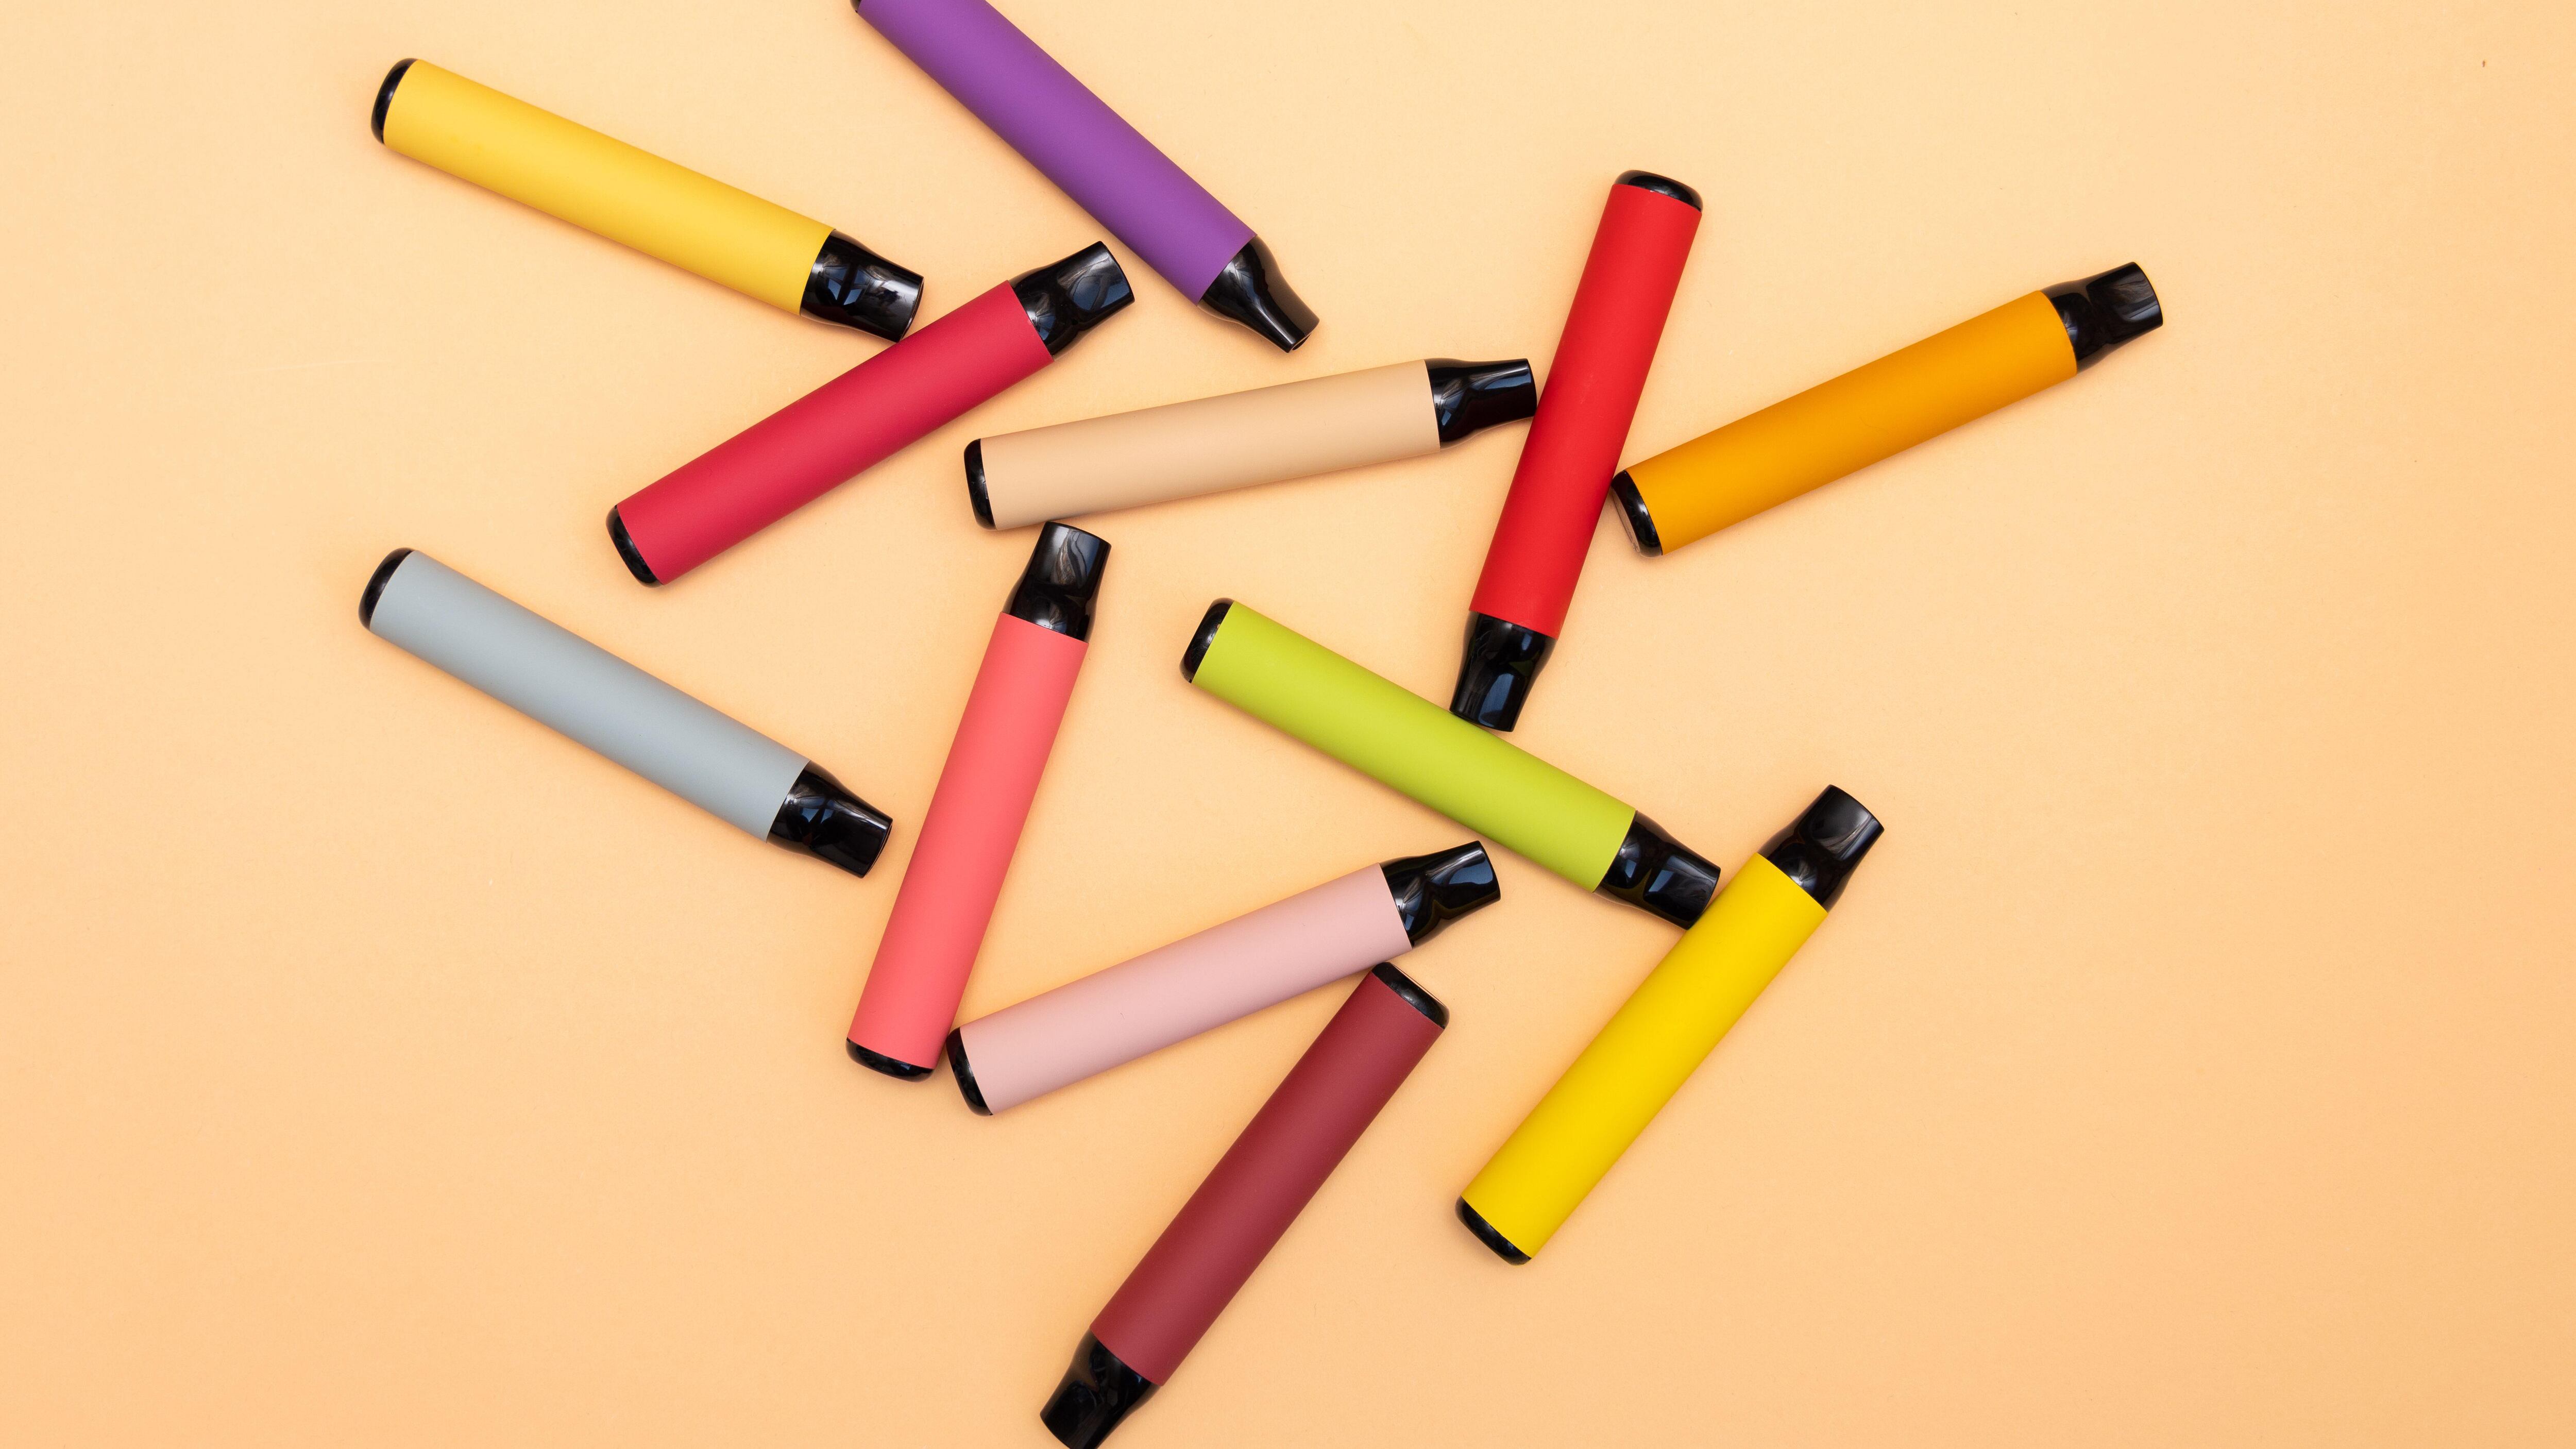 The colours and flavours of disposable vapes are appealing to children